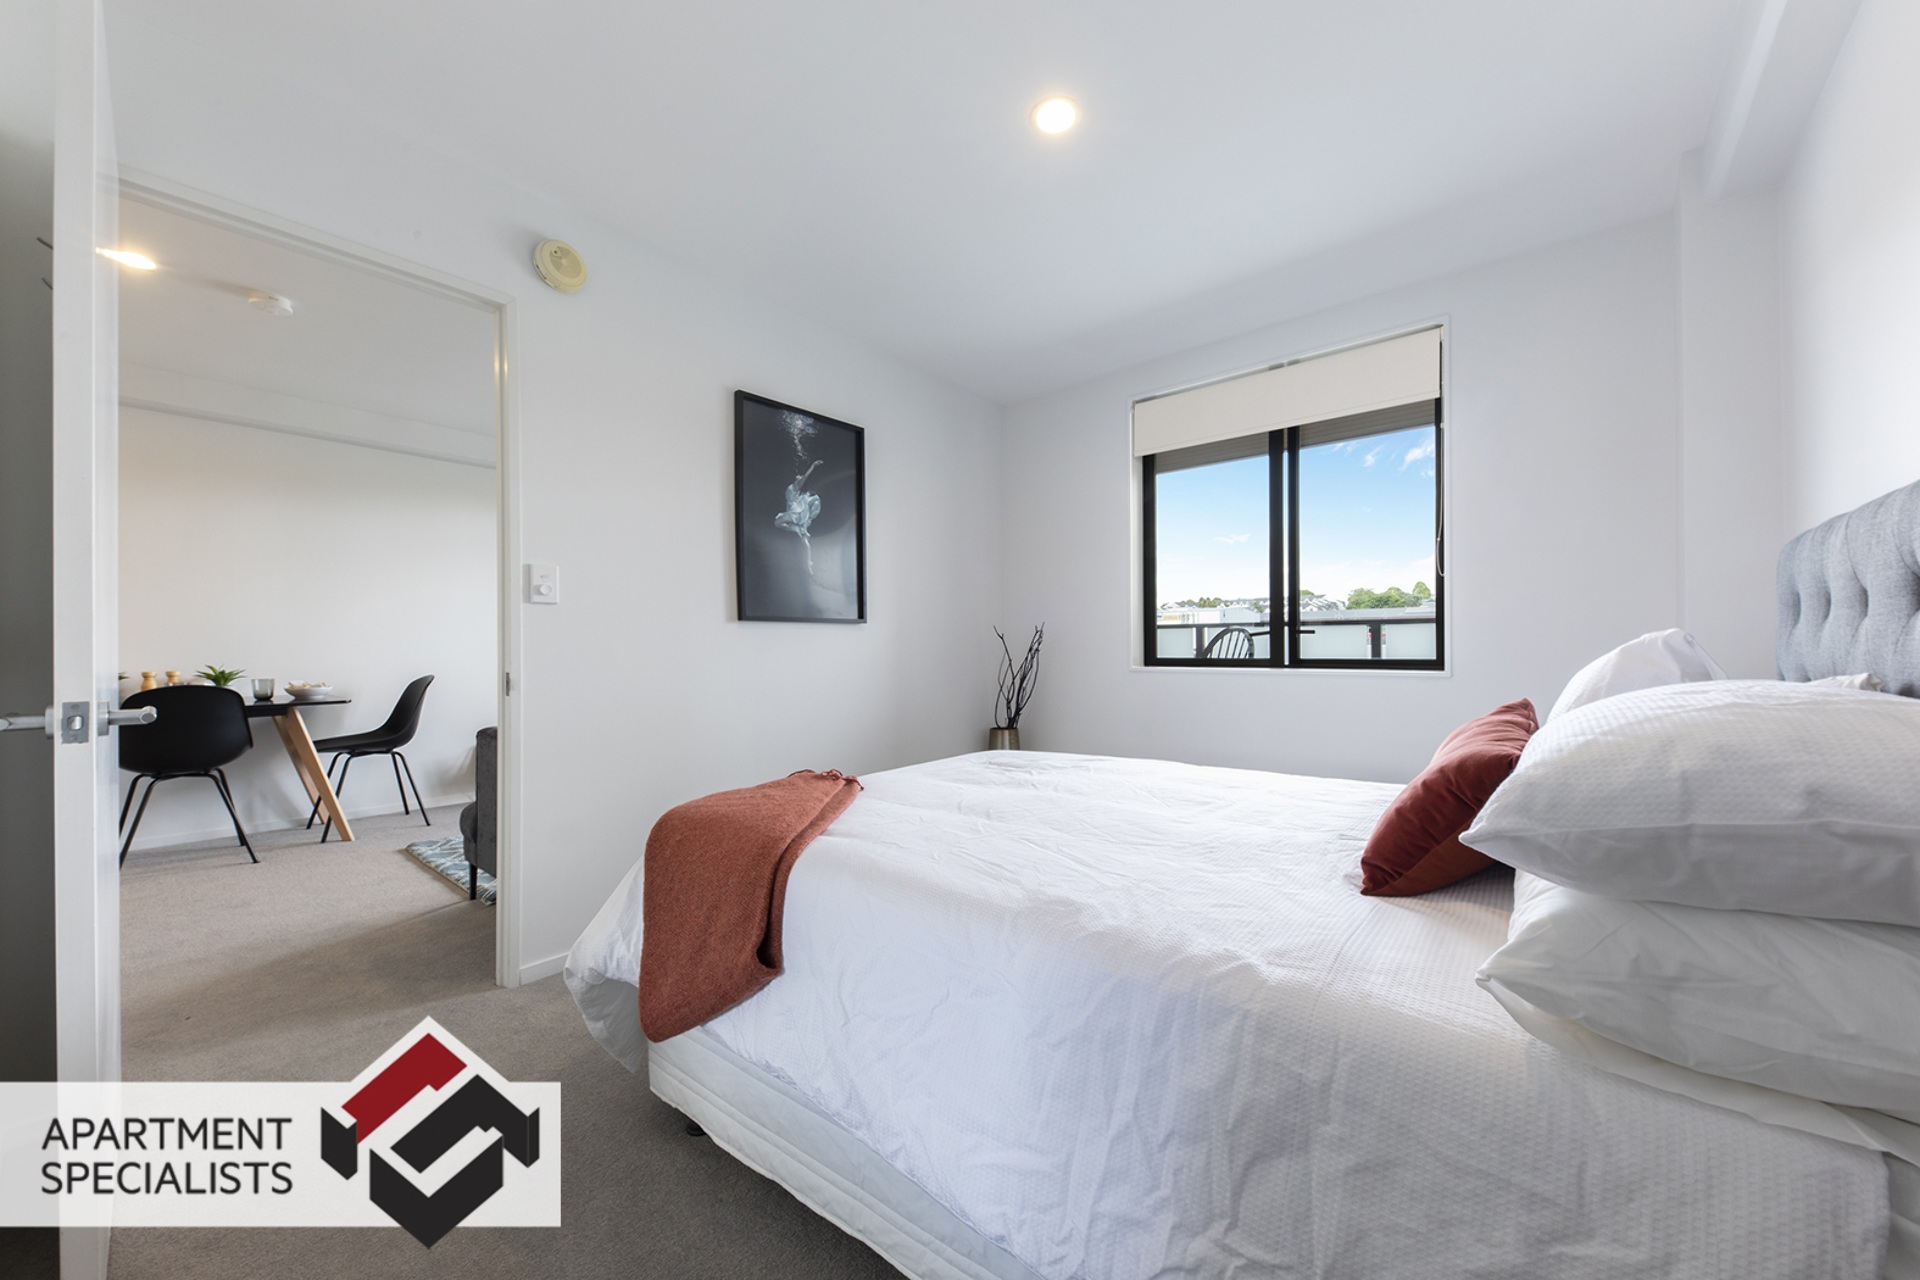 6 | 250 Richmond Road, Ponsonby | Apartment Specialists